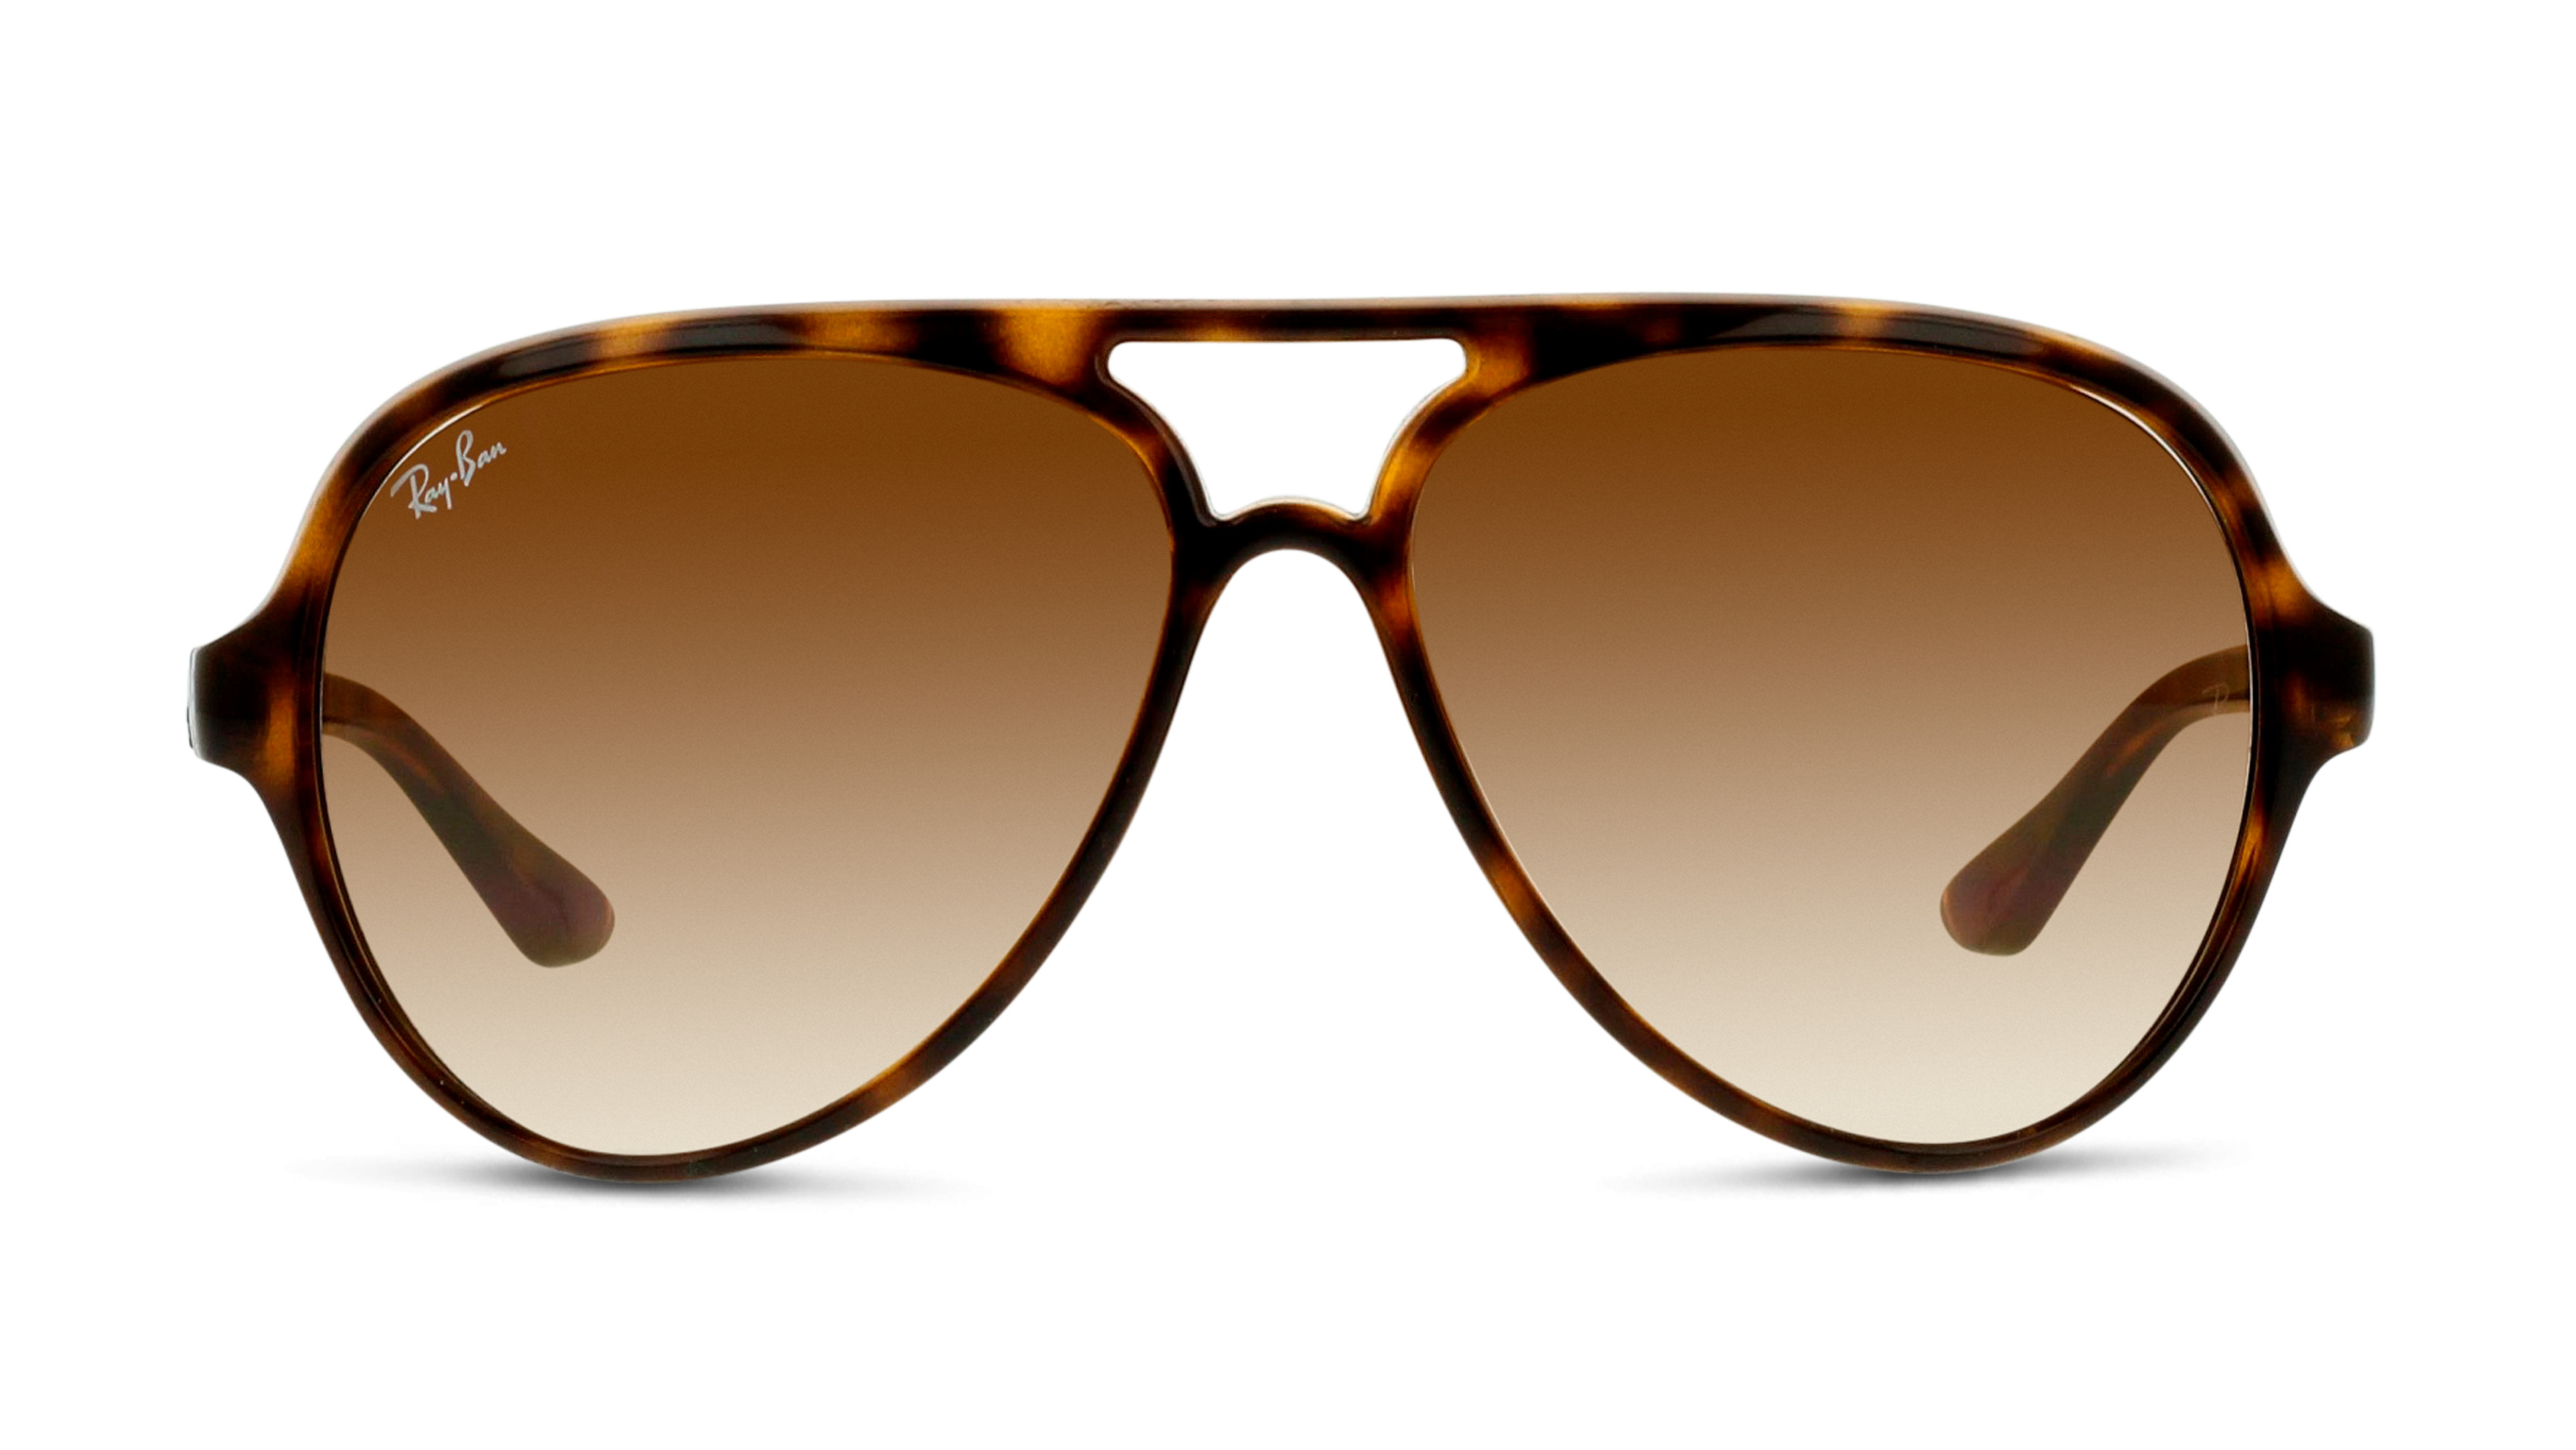 [products.image.front] Ray-Ban CATS 5000 0RB4125 710/51 Sonnenbrille